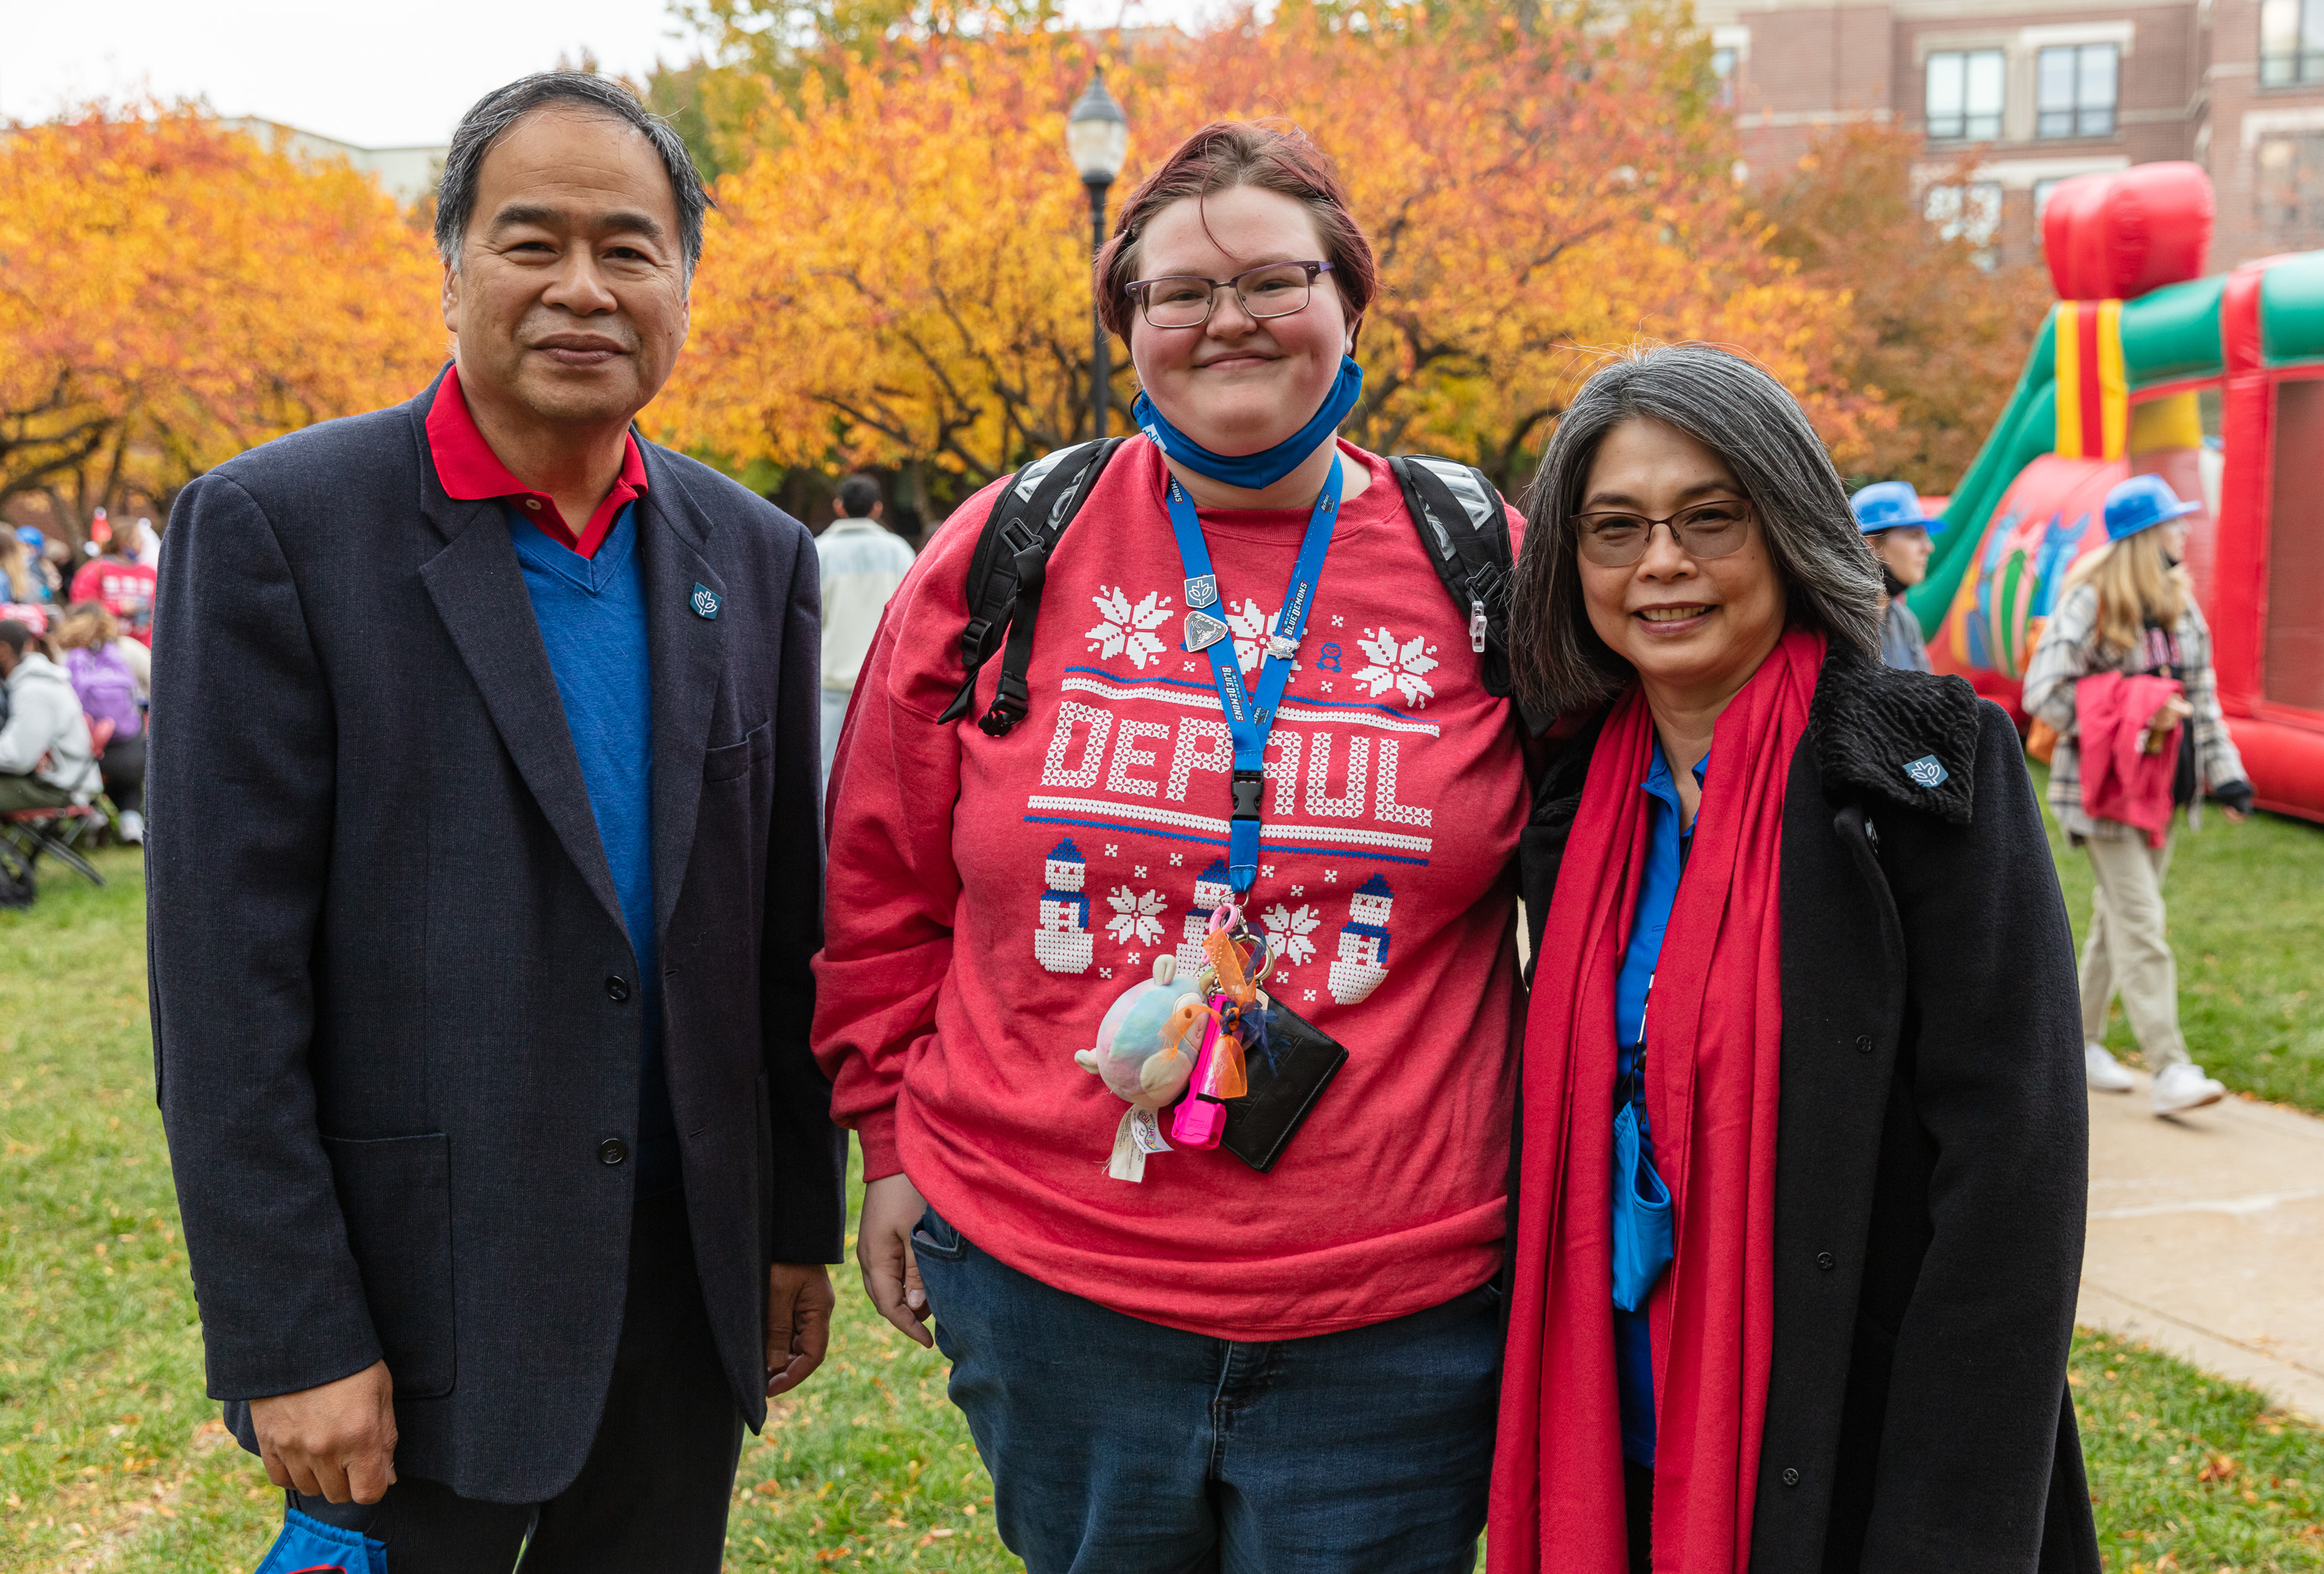 A. Gabriel Esteban, Ph.D., president of DePaul University, attended the party and had a chance to catch up with students. (DePaul University/Randall Spriggs)